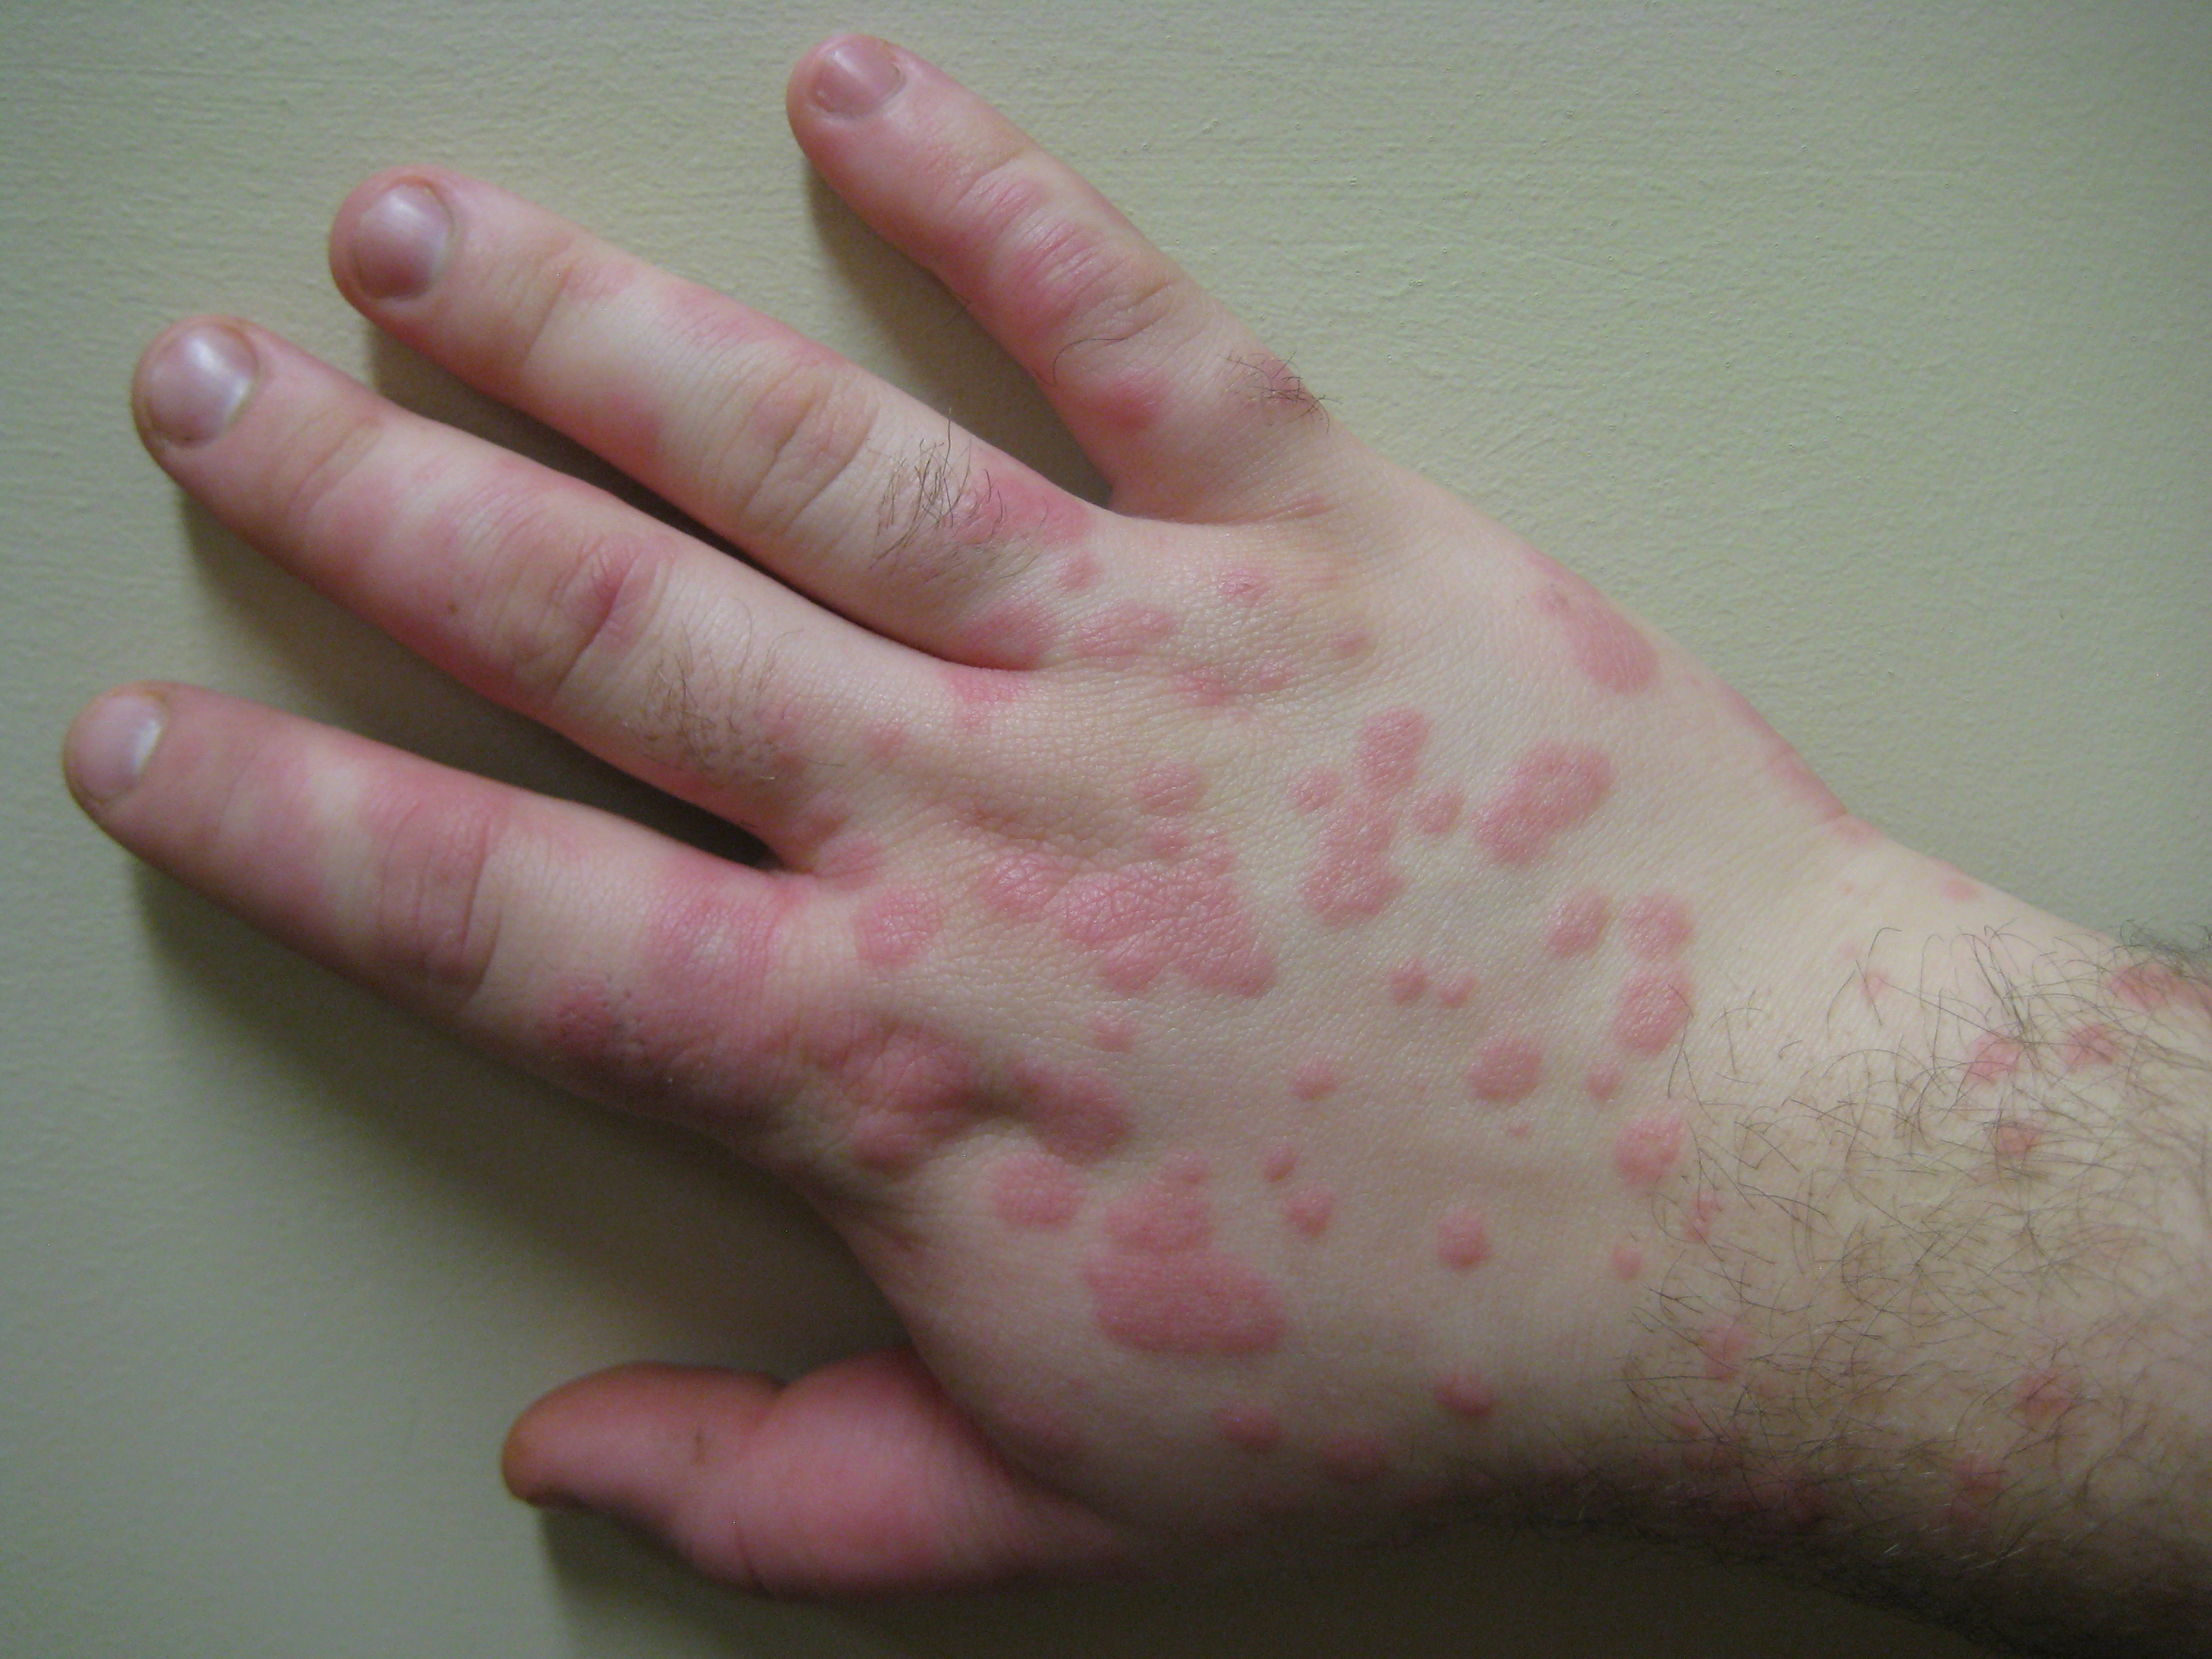 person with shingles rash on their hand 